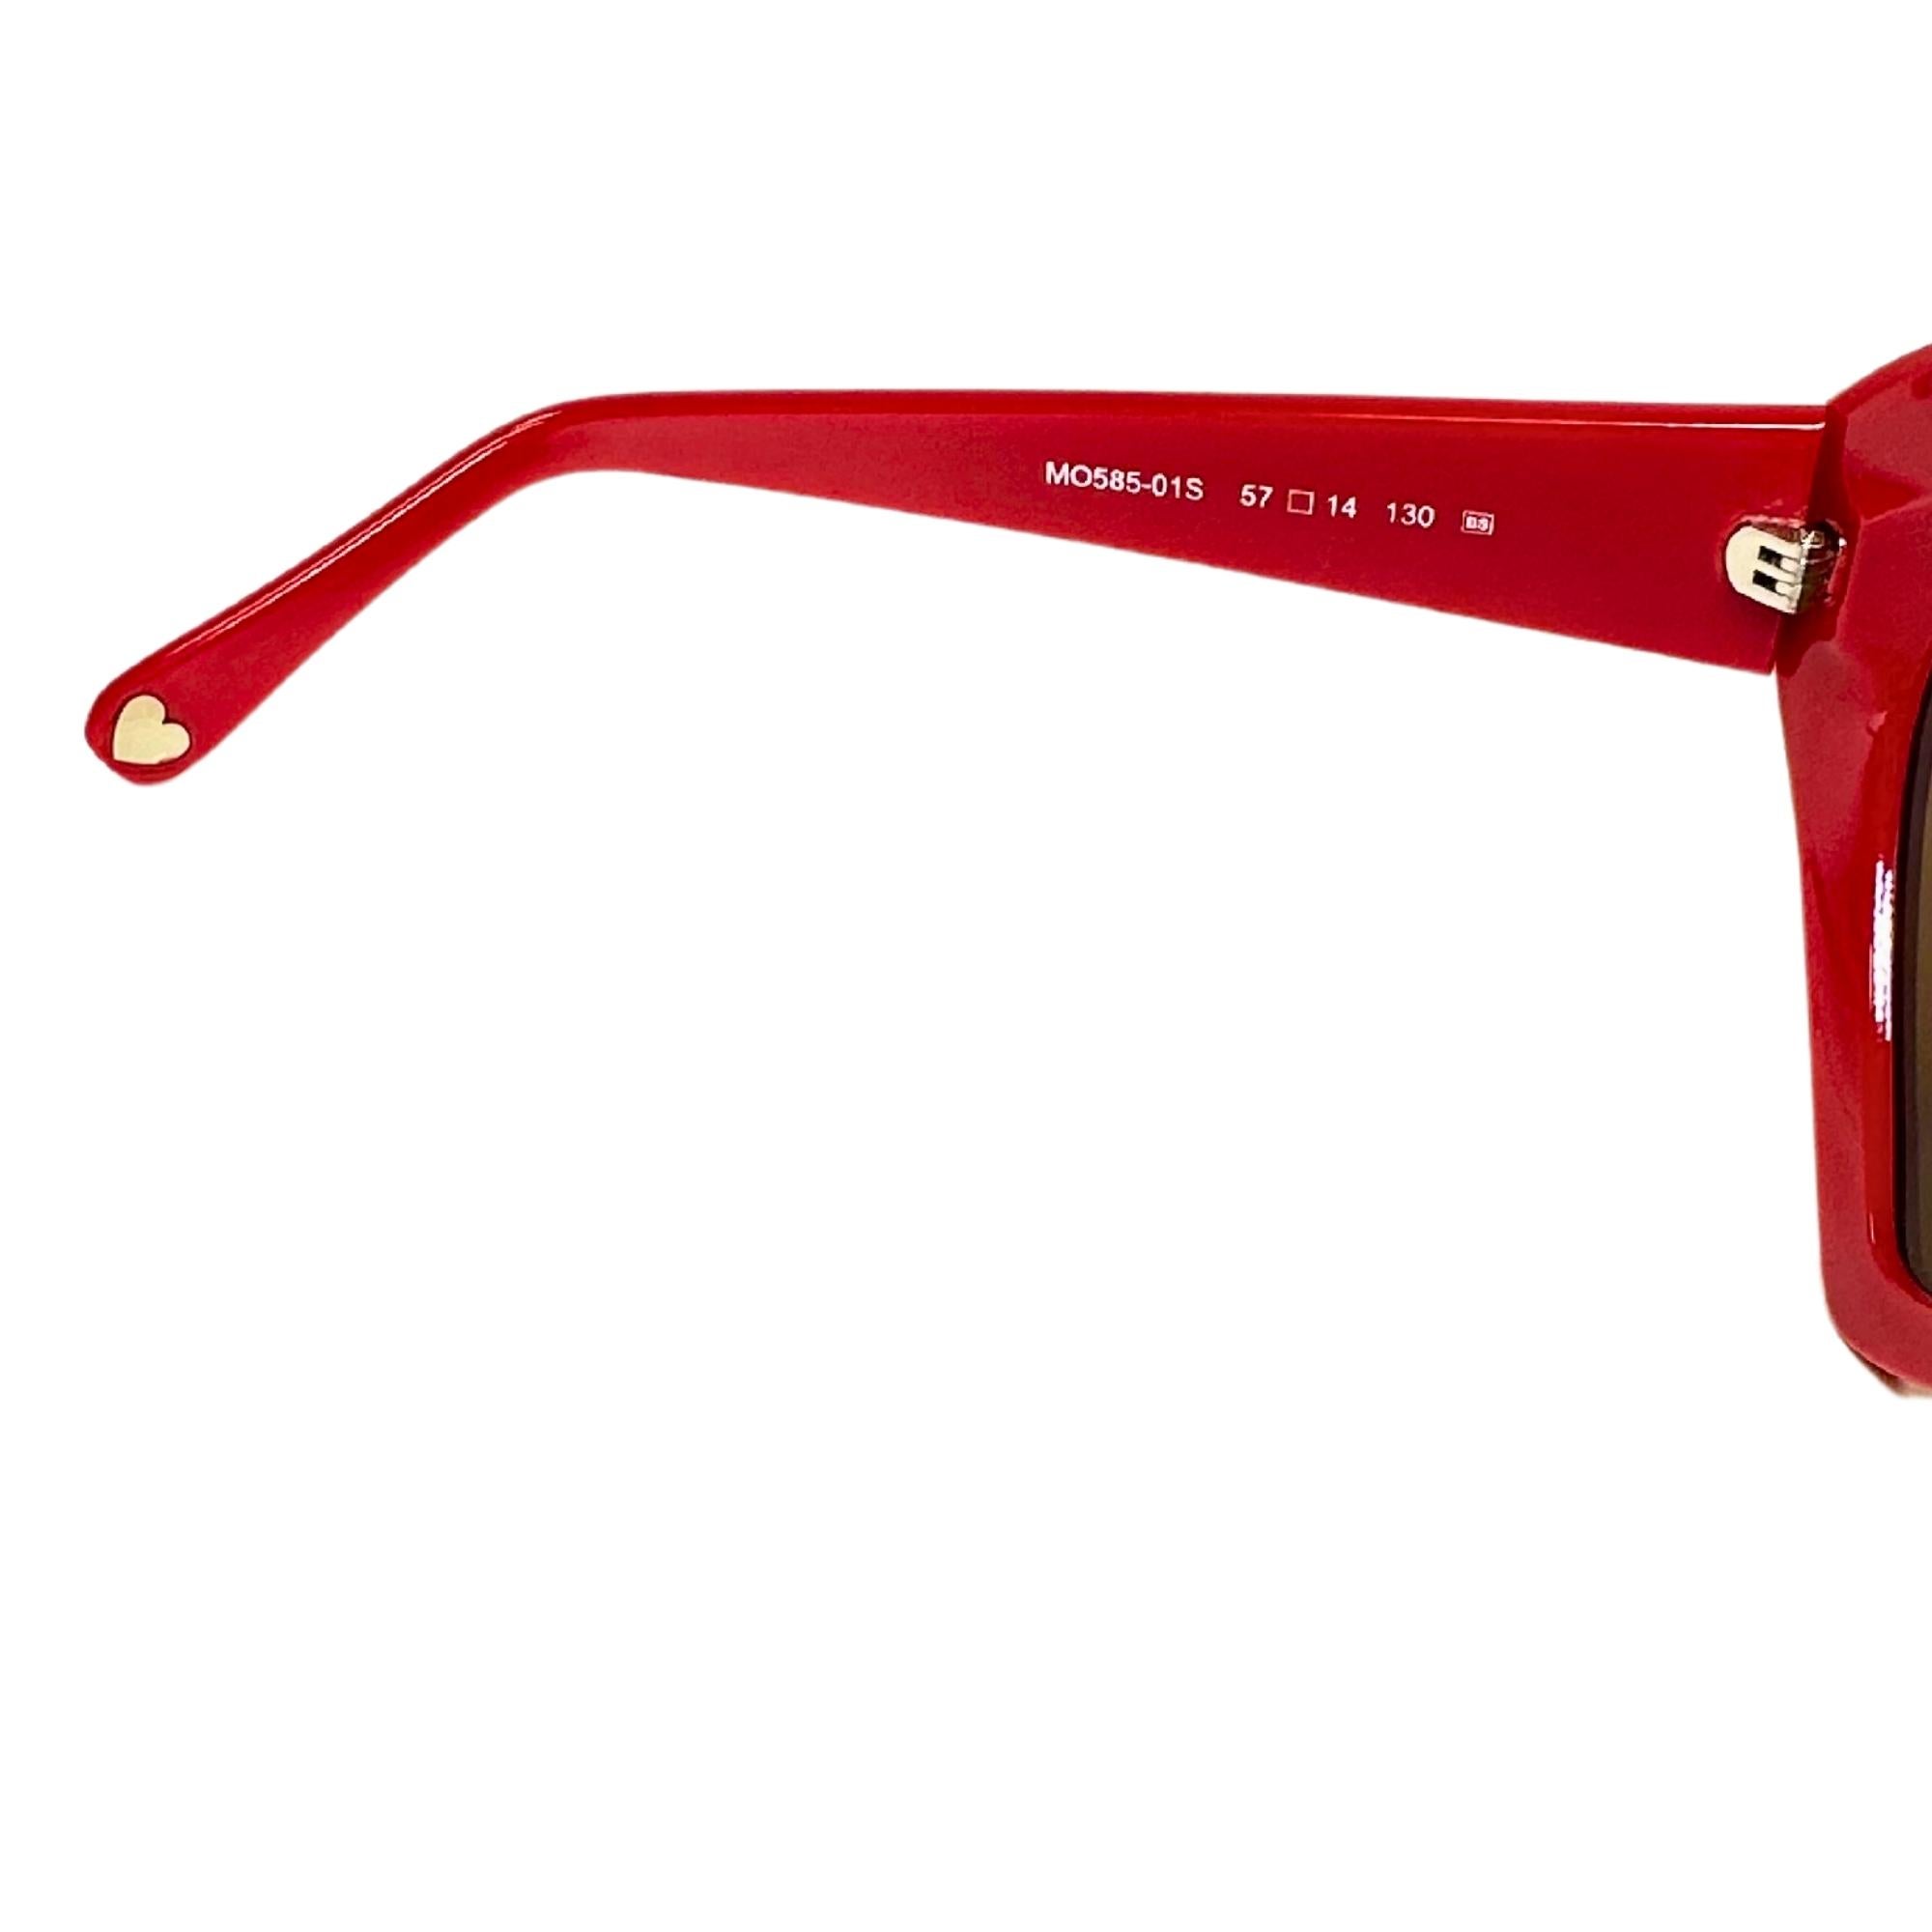 Moschino Retro Red Love Heart Shaped Sunglasses (MO585-01S) In Good Condition For Sale In Montreal, Quebec